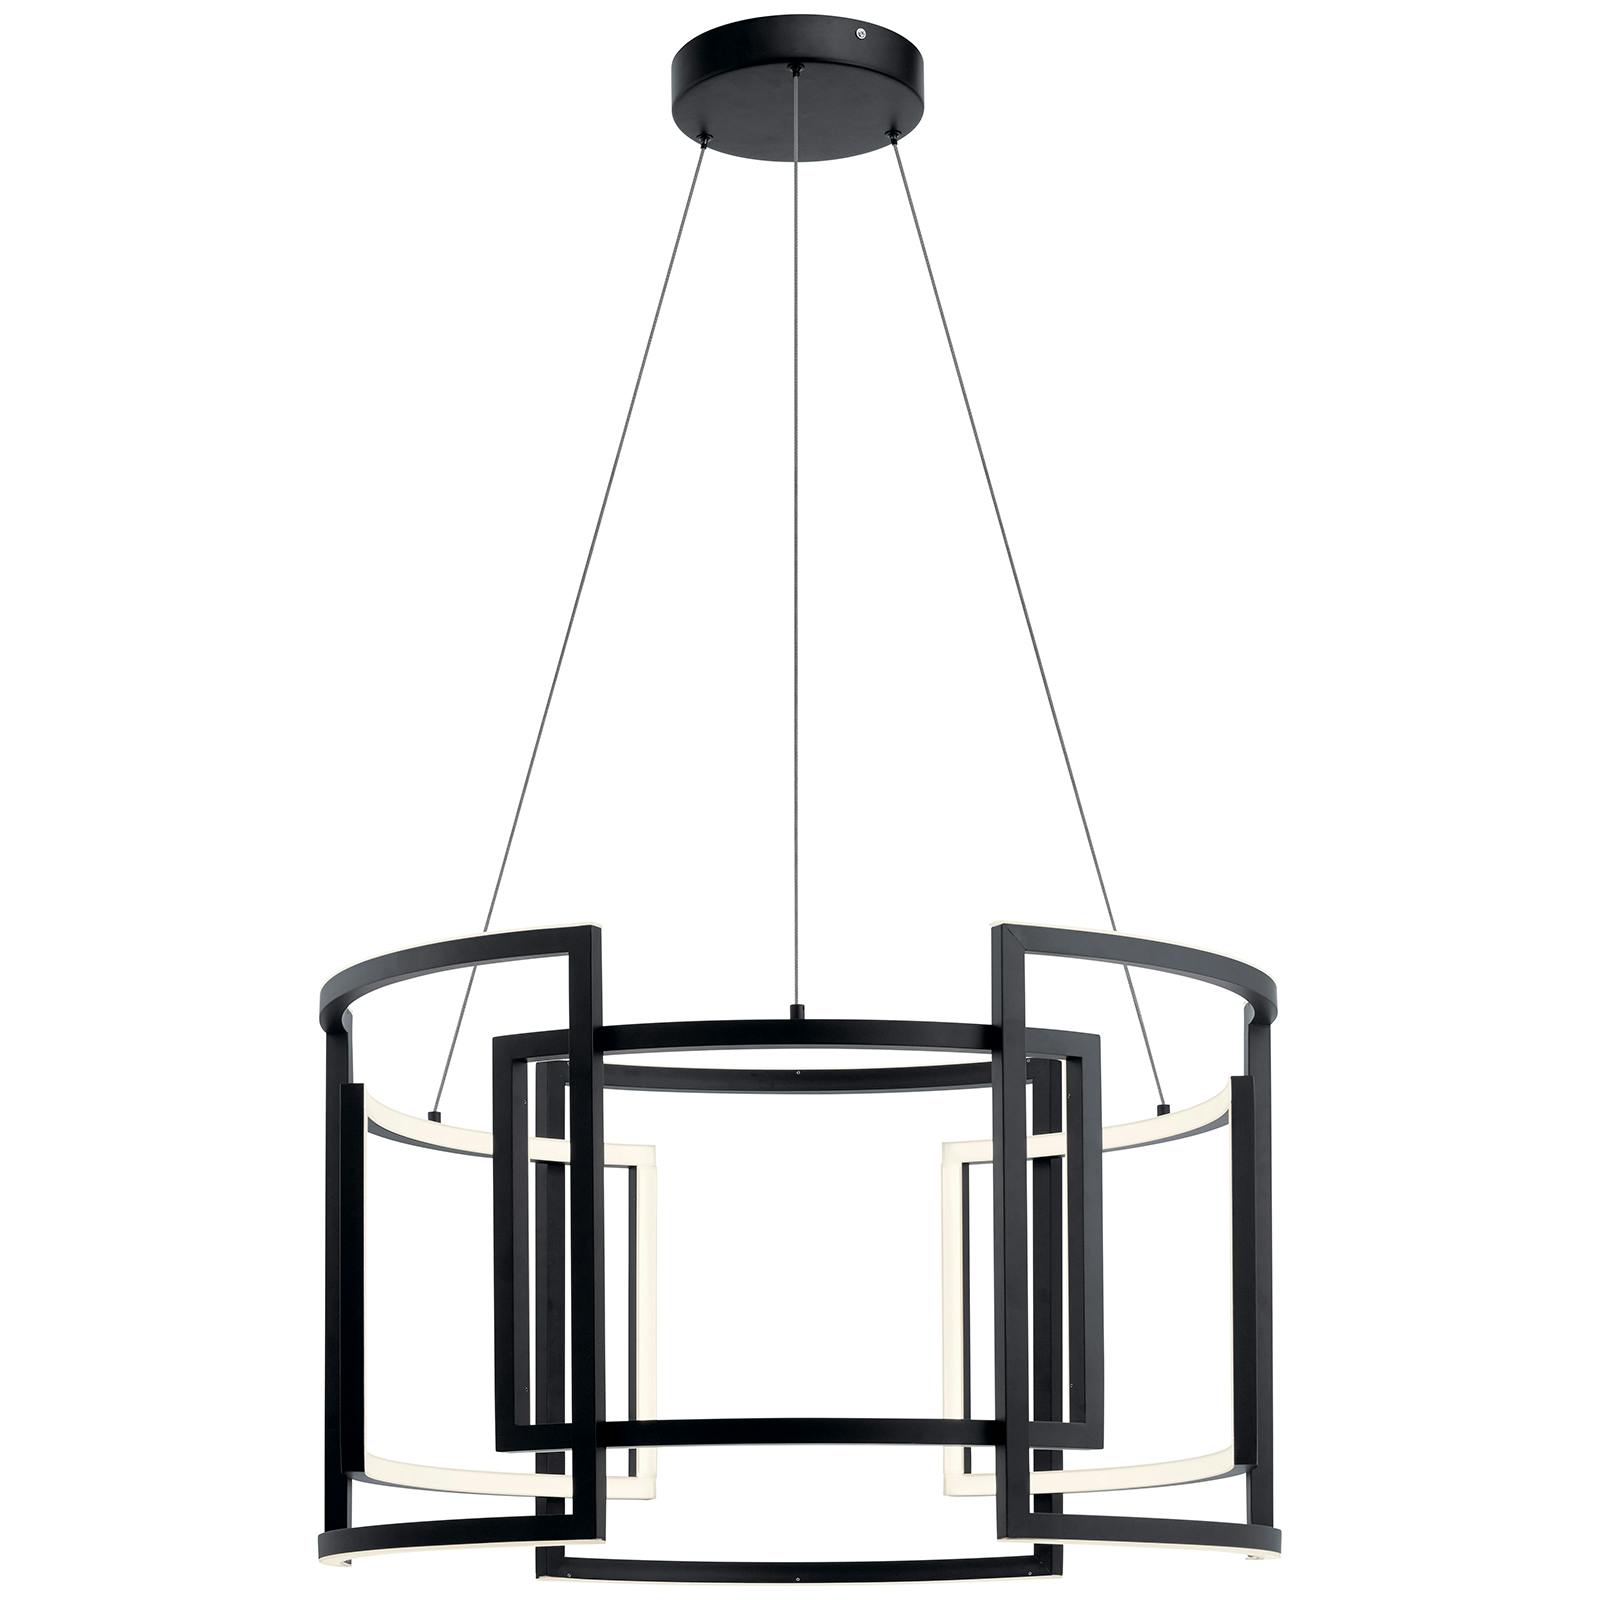 Profile view of the Melko™ 32" LED Round Pendant Black on a white background